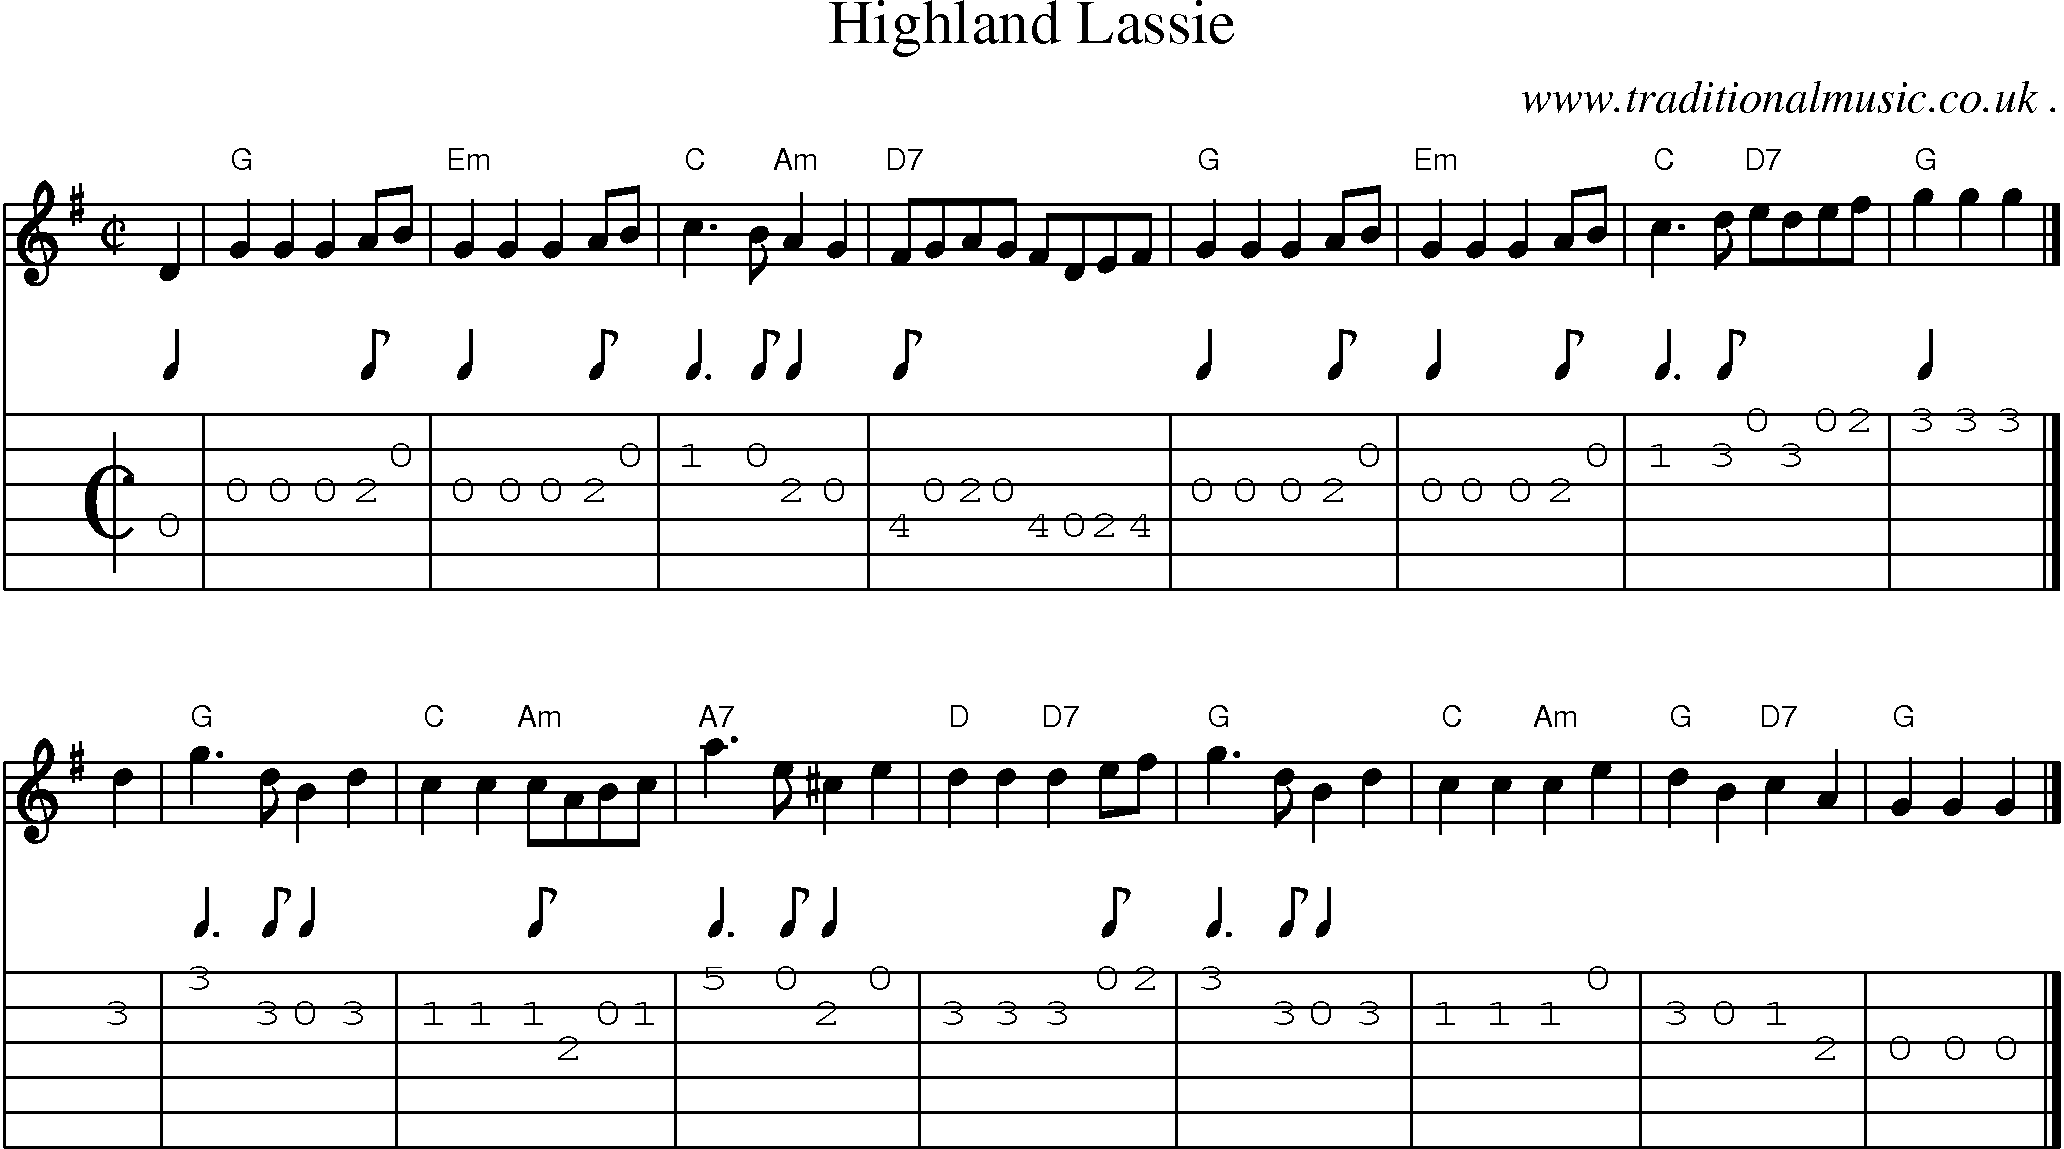 Sheet-music  score, Chords and Guitar Tabs for Highland Lassie